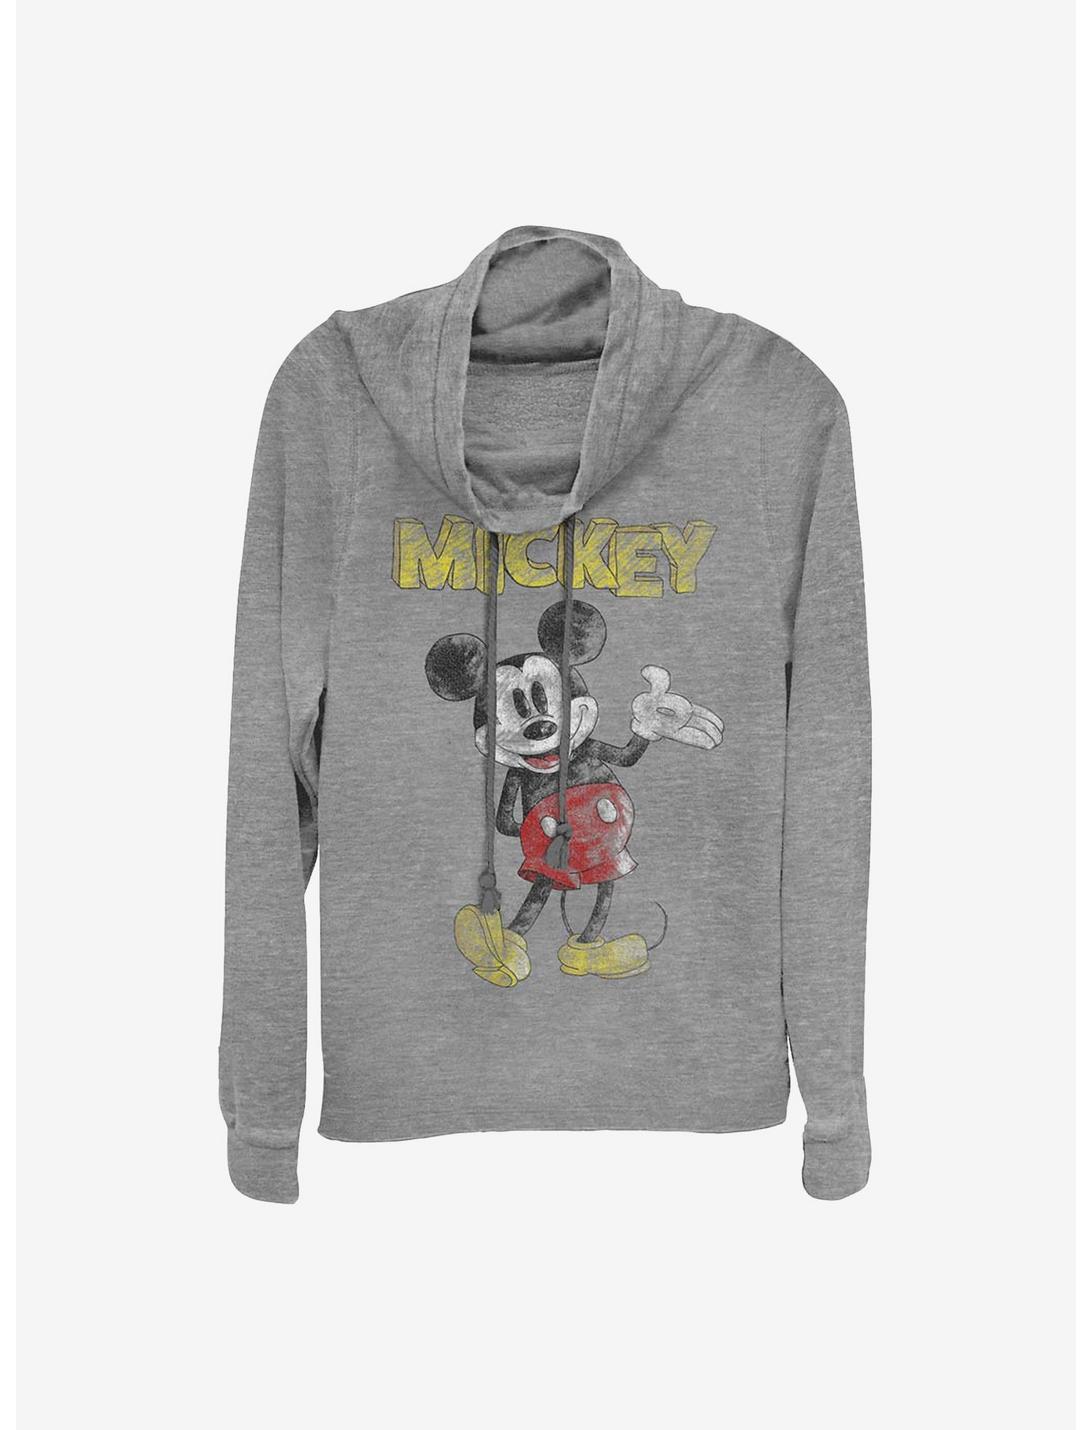 Disney Mickey Mouse Sketch Mickey Cowlneck Long-Sleeve Girls Top, GRAY HTR, hi-res